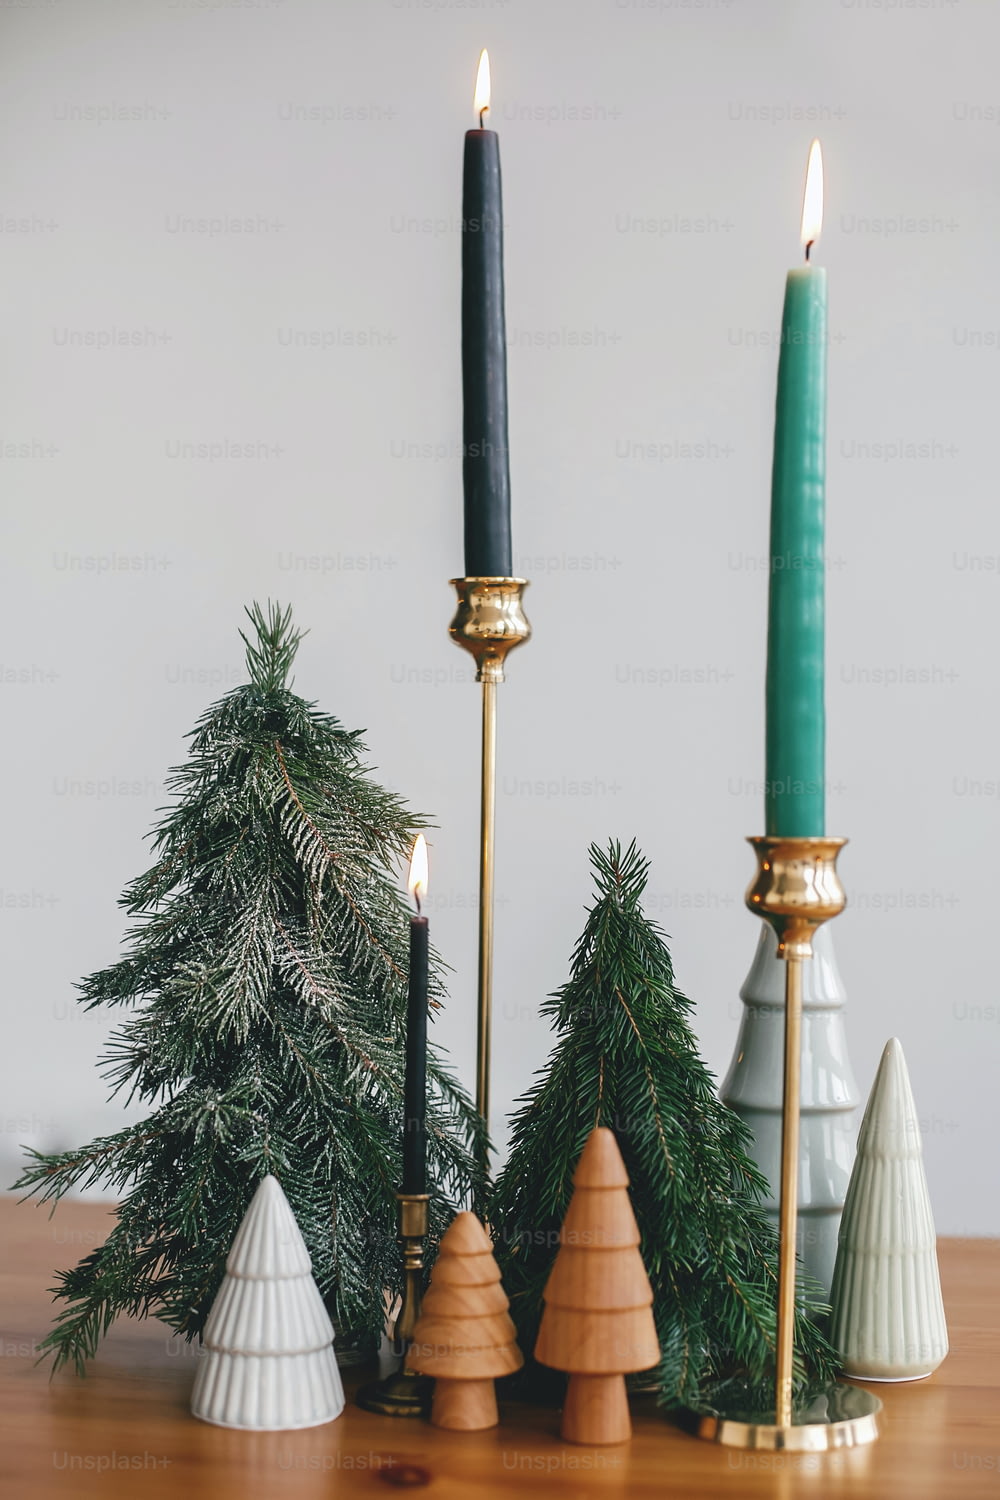 Christmas trees, candles and pine cones on rustic wooden table. Festive modern zero waste decor. Miniature wooden and handmade fir trees. Happy holidays